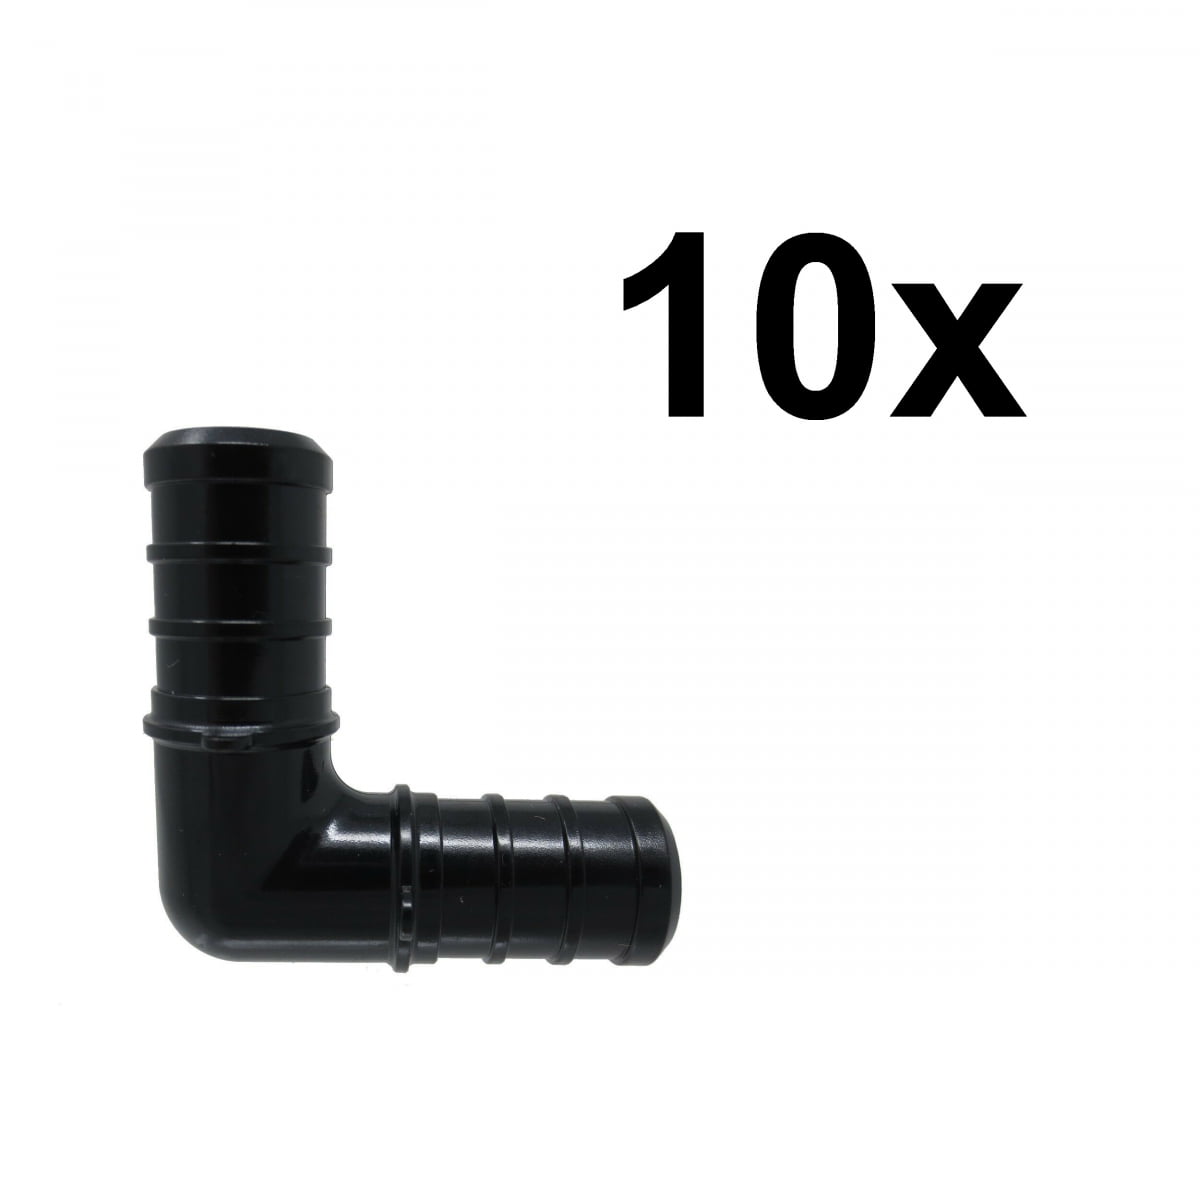 10x 1/2" Pex 90 Degree Couplings Turn Elbow Connector Crimp Clamp Poly Plastic